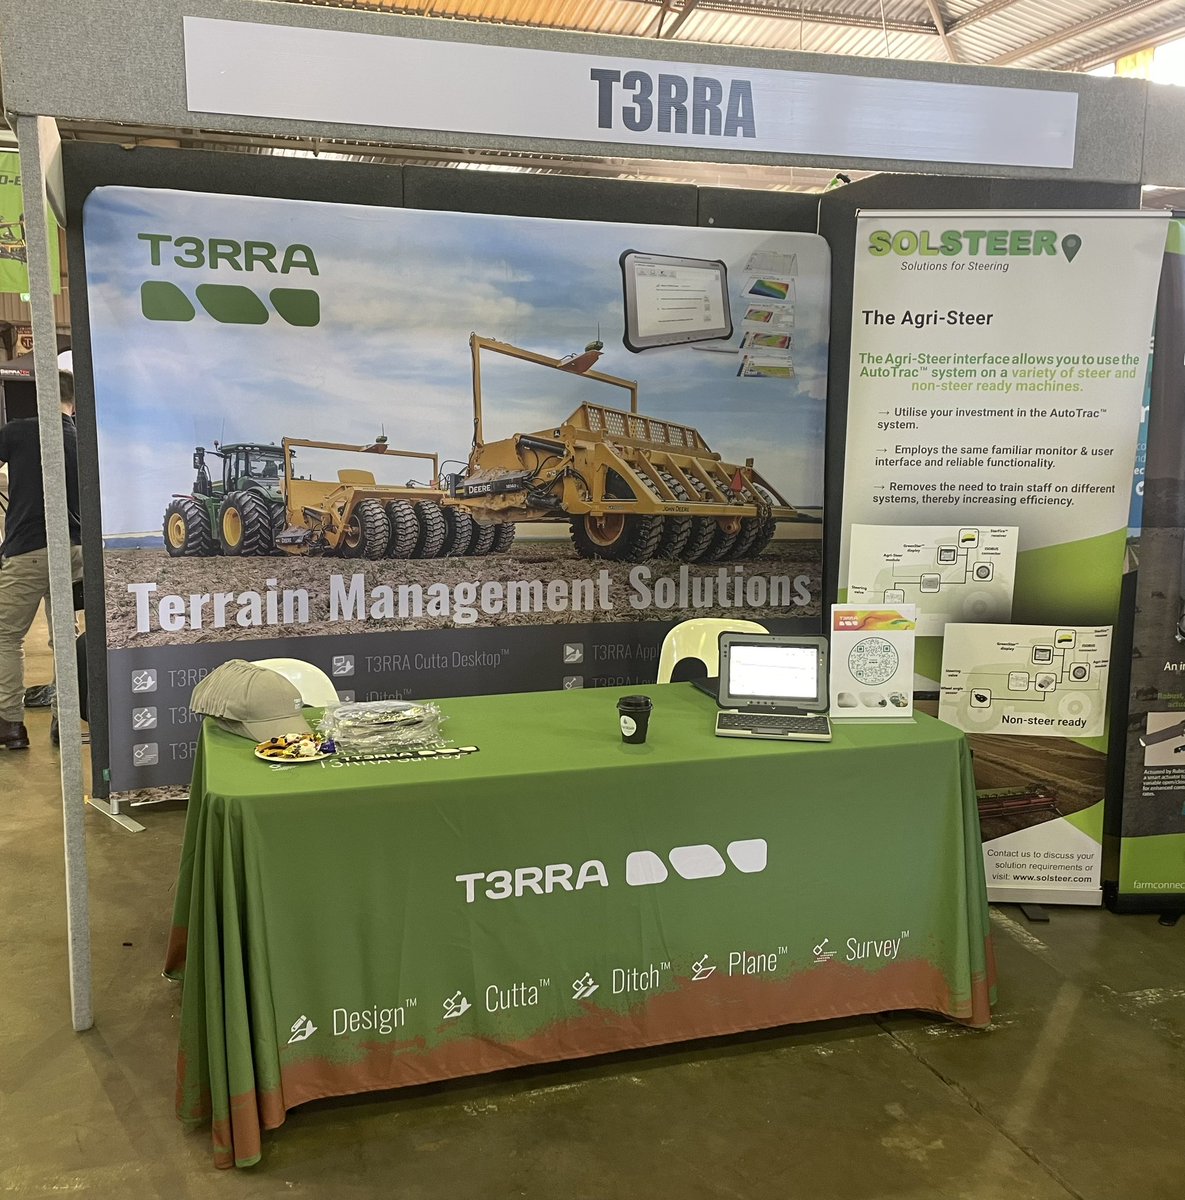 All set for the #cottontradeshow at the Toowoomba show grounds. Drop in and say hi 👋. @pts #T3RRA